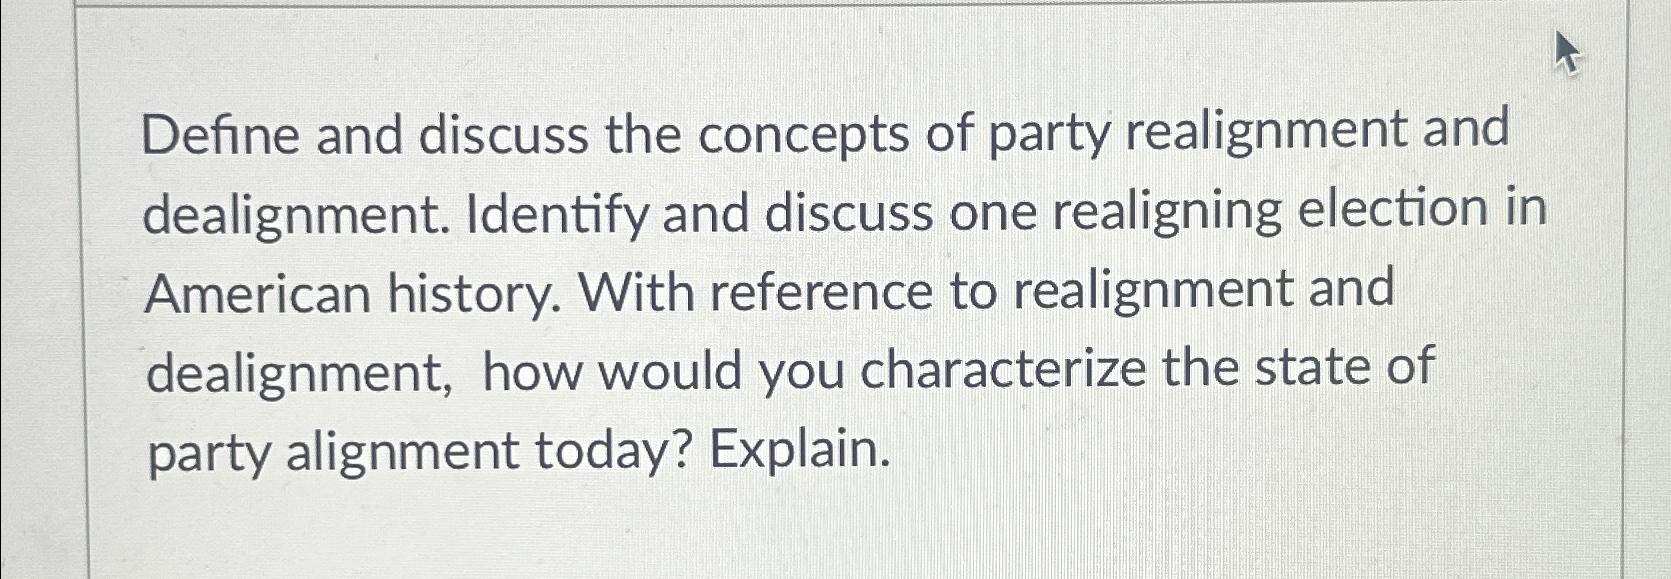 Define and discuss the concepts of party realignment and dealignment. Identify and discuss one realigning